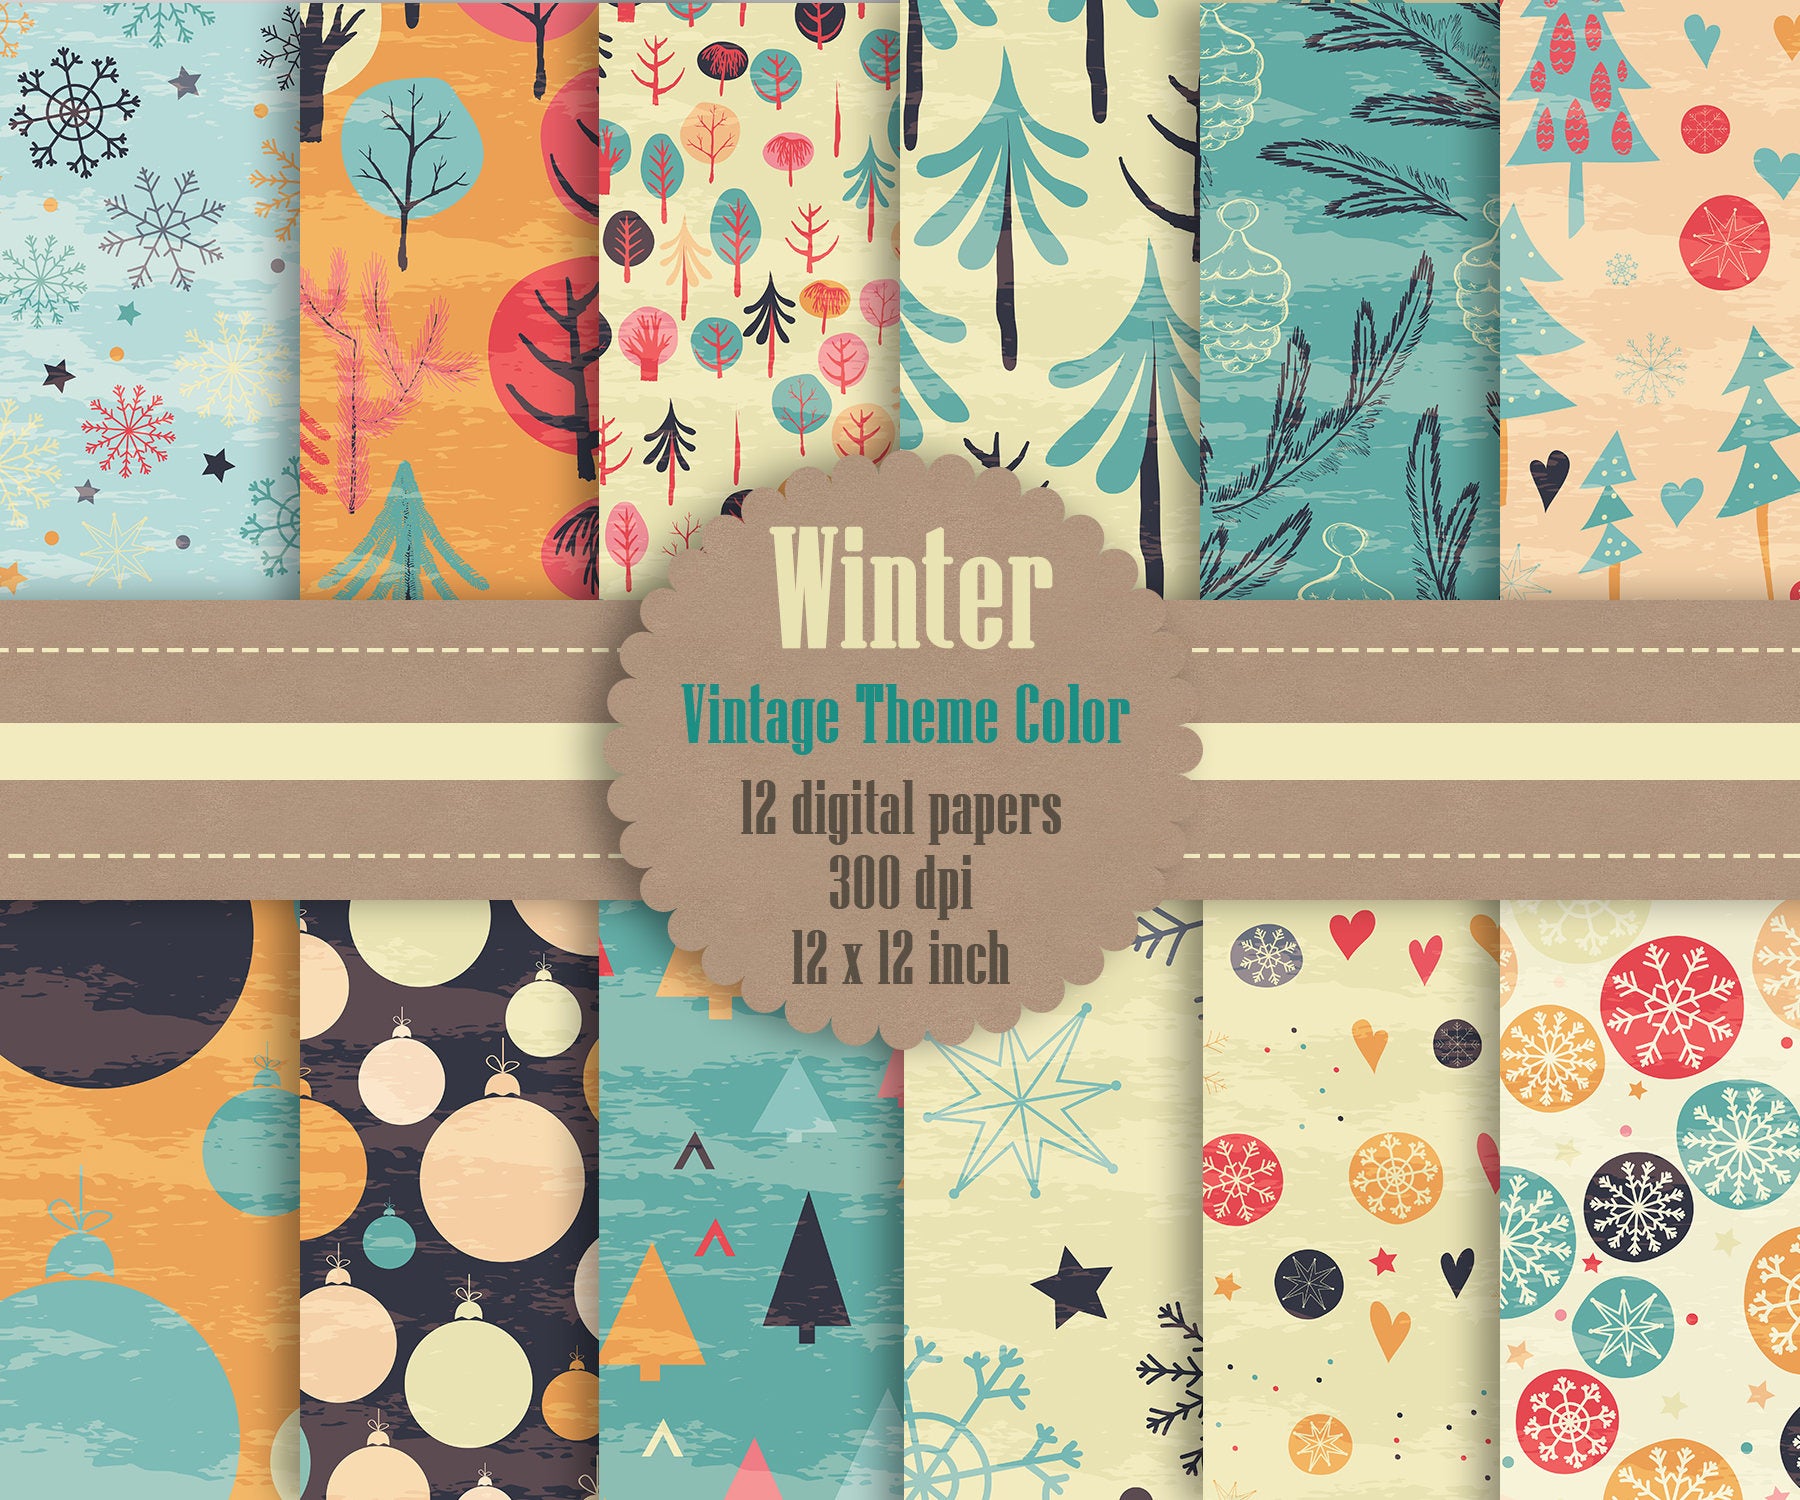 12 Winter Pattern Digital Papers in Vintage Theme Color in 12 inch, Instant Download, High Resolution 300 Dpi, Commercial Use